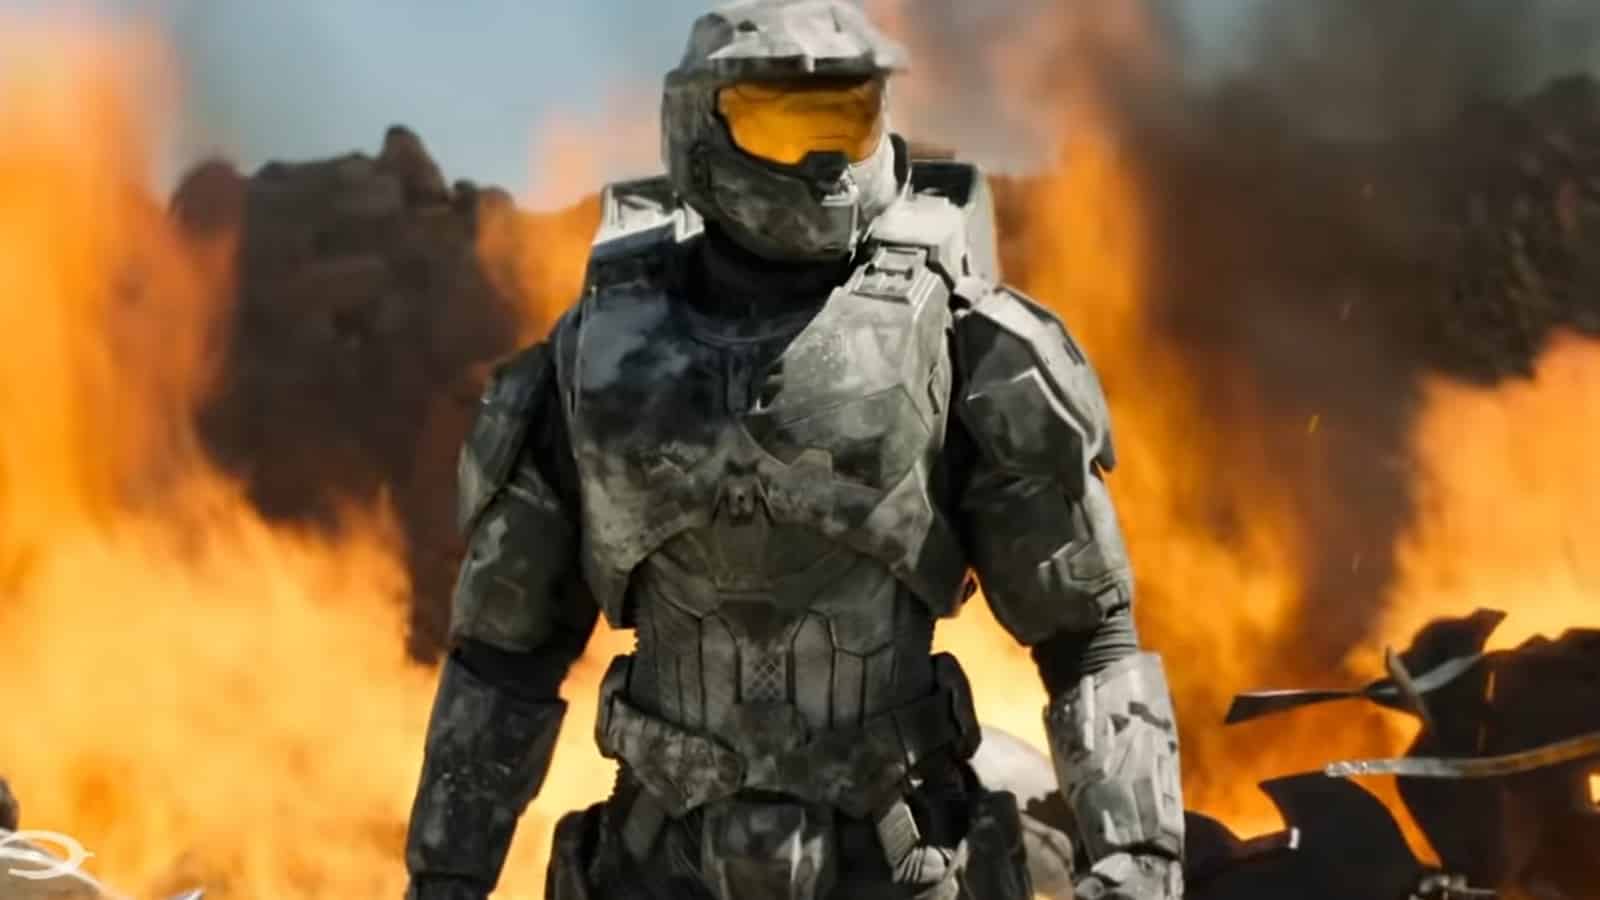 The live-action 'Halo' TV series has cast Master Chief